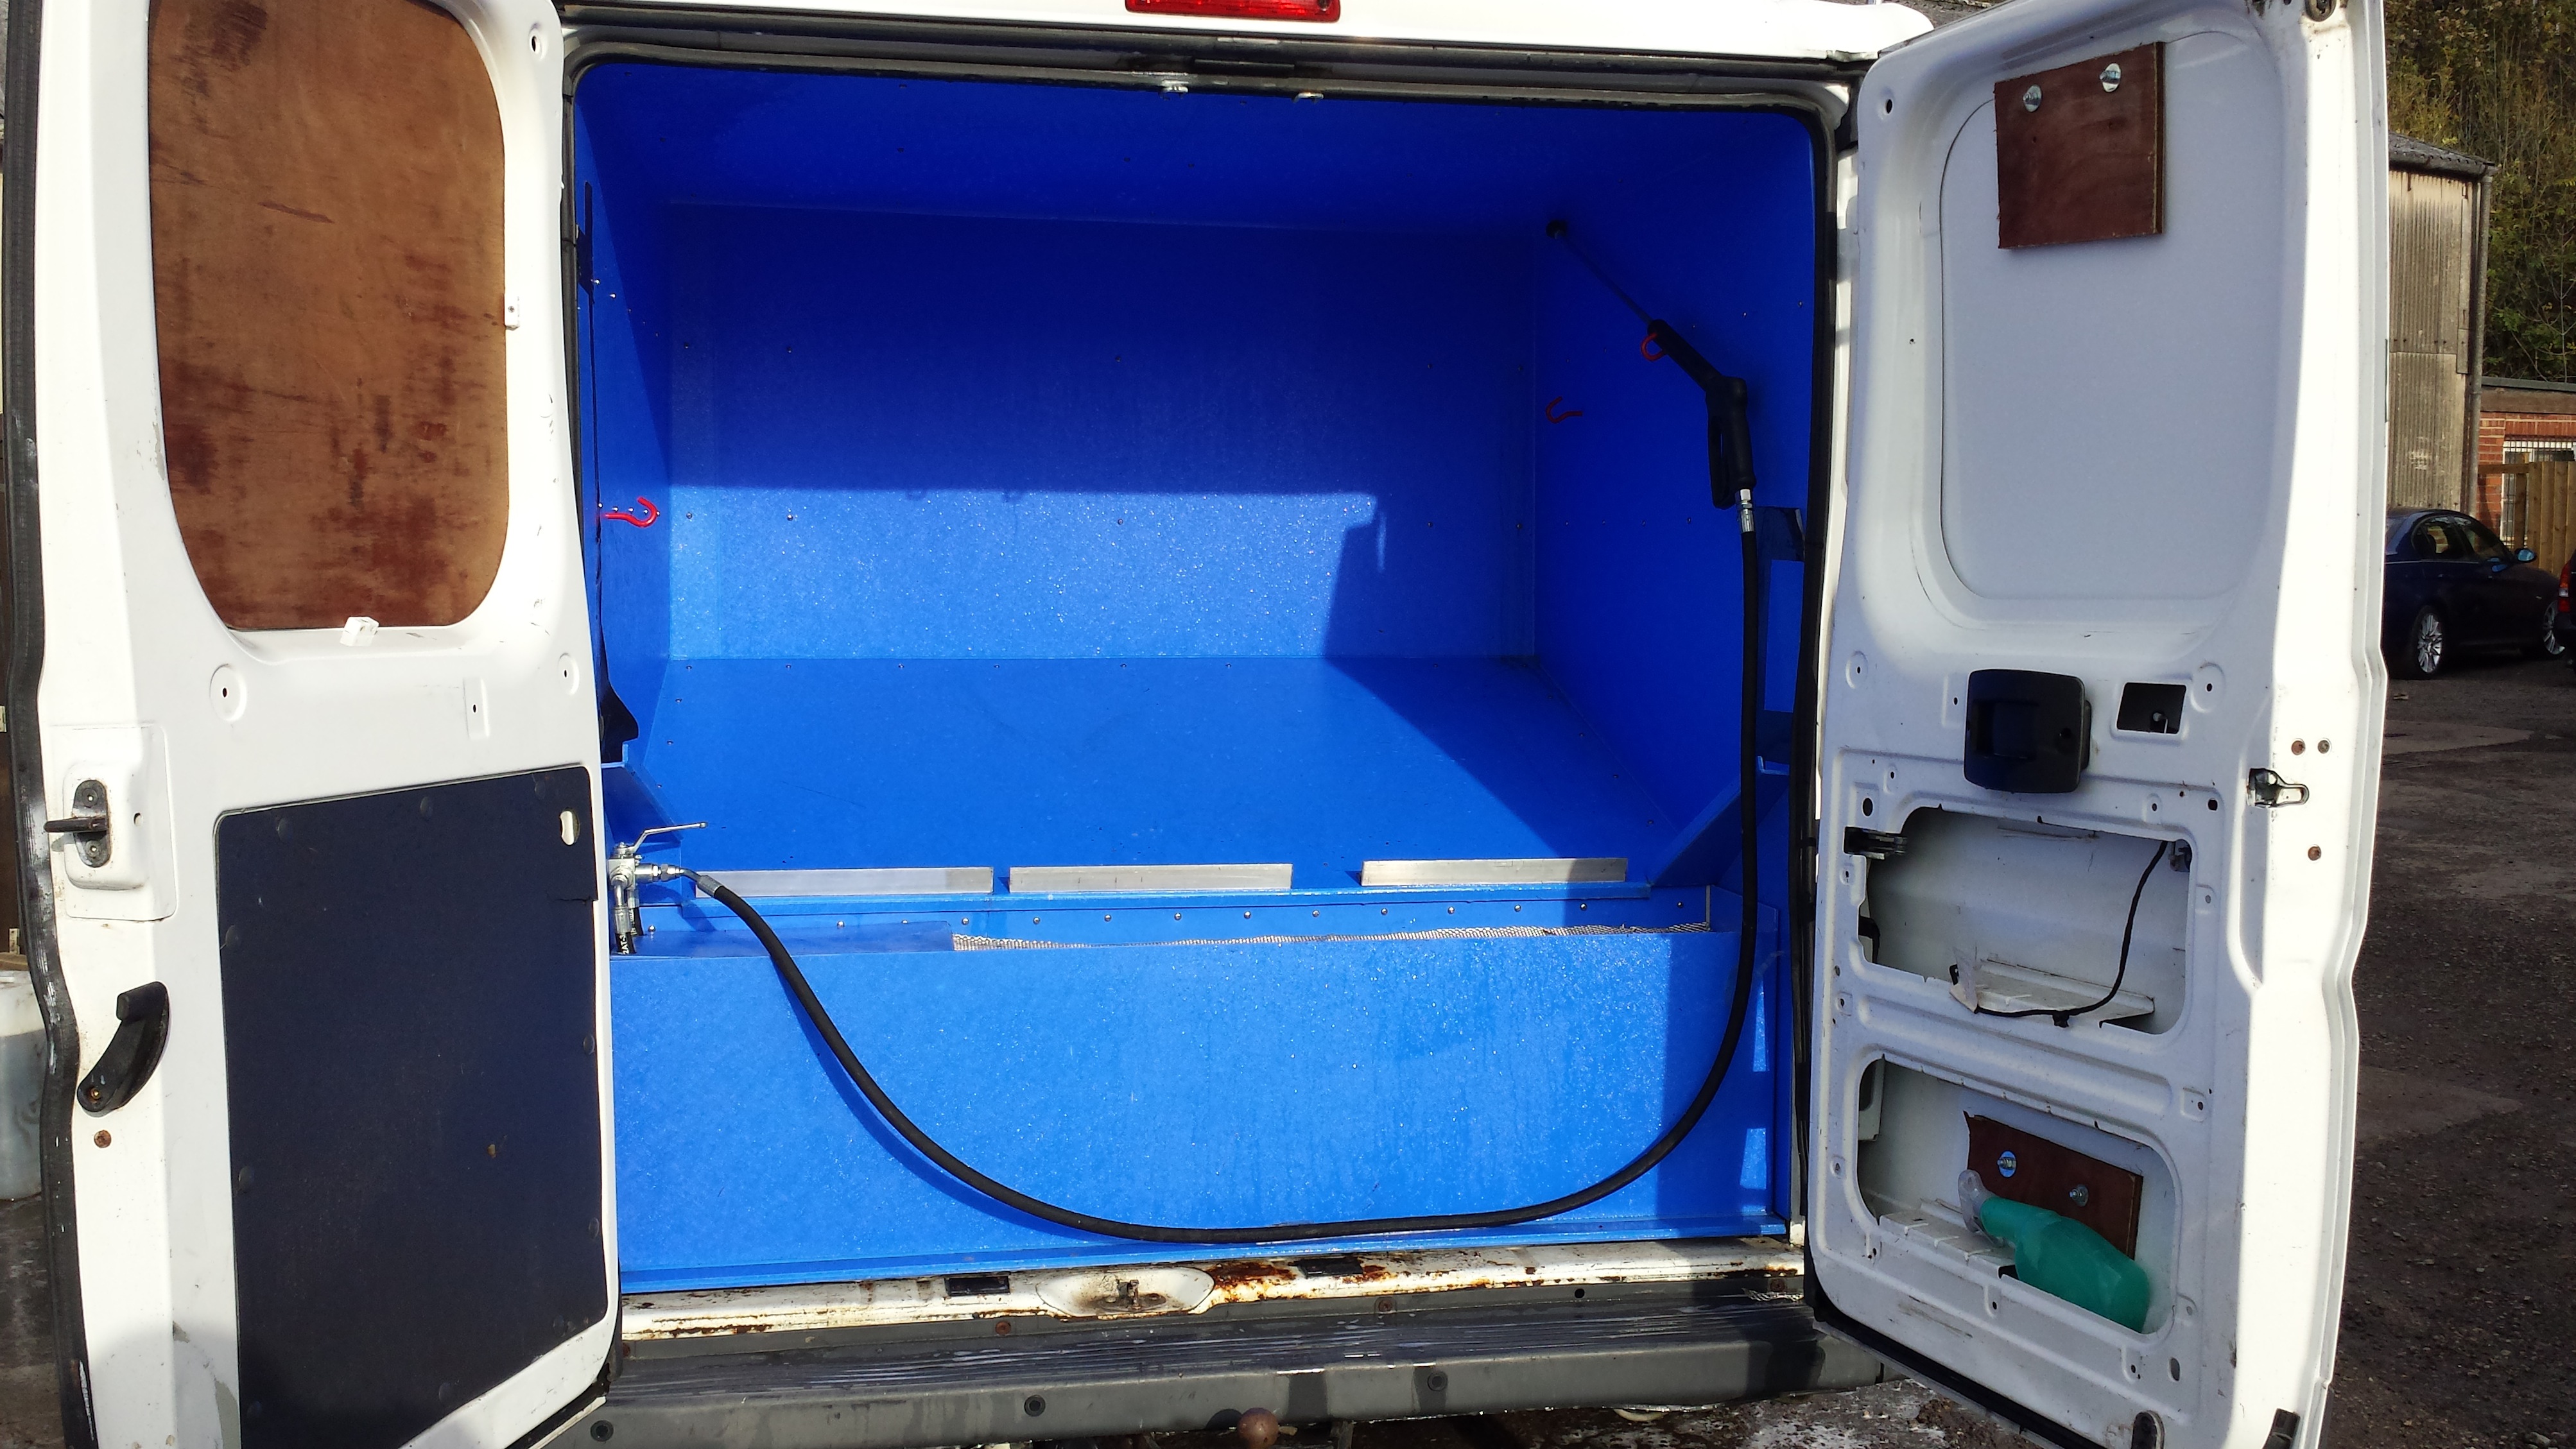 window cleaning vans for sale on ebay